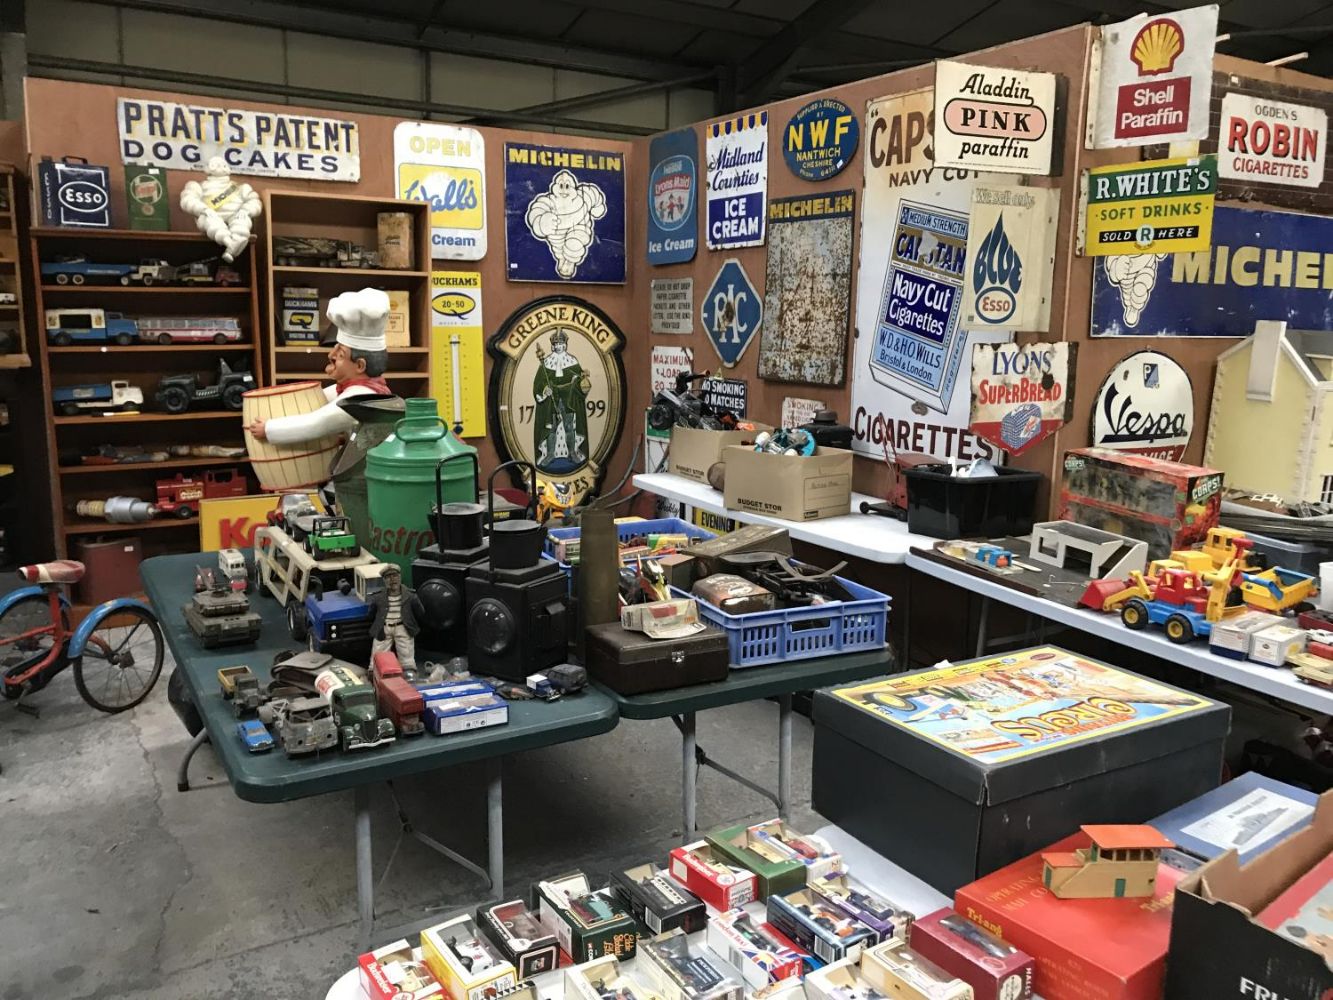 Two Day Auction Of Collectables, Antiques, Furniture, Vintage Items including a special sale of Toys - COLLECTION BY APPOINTMENT